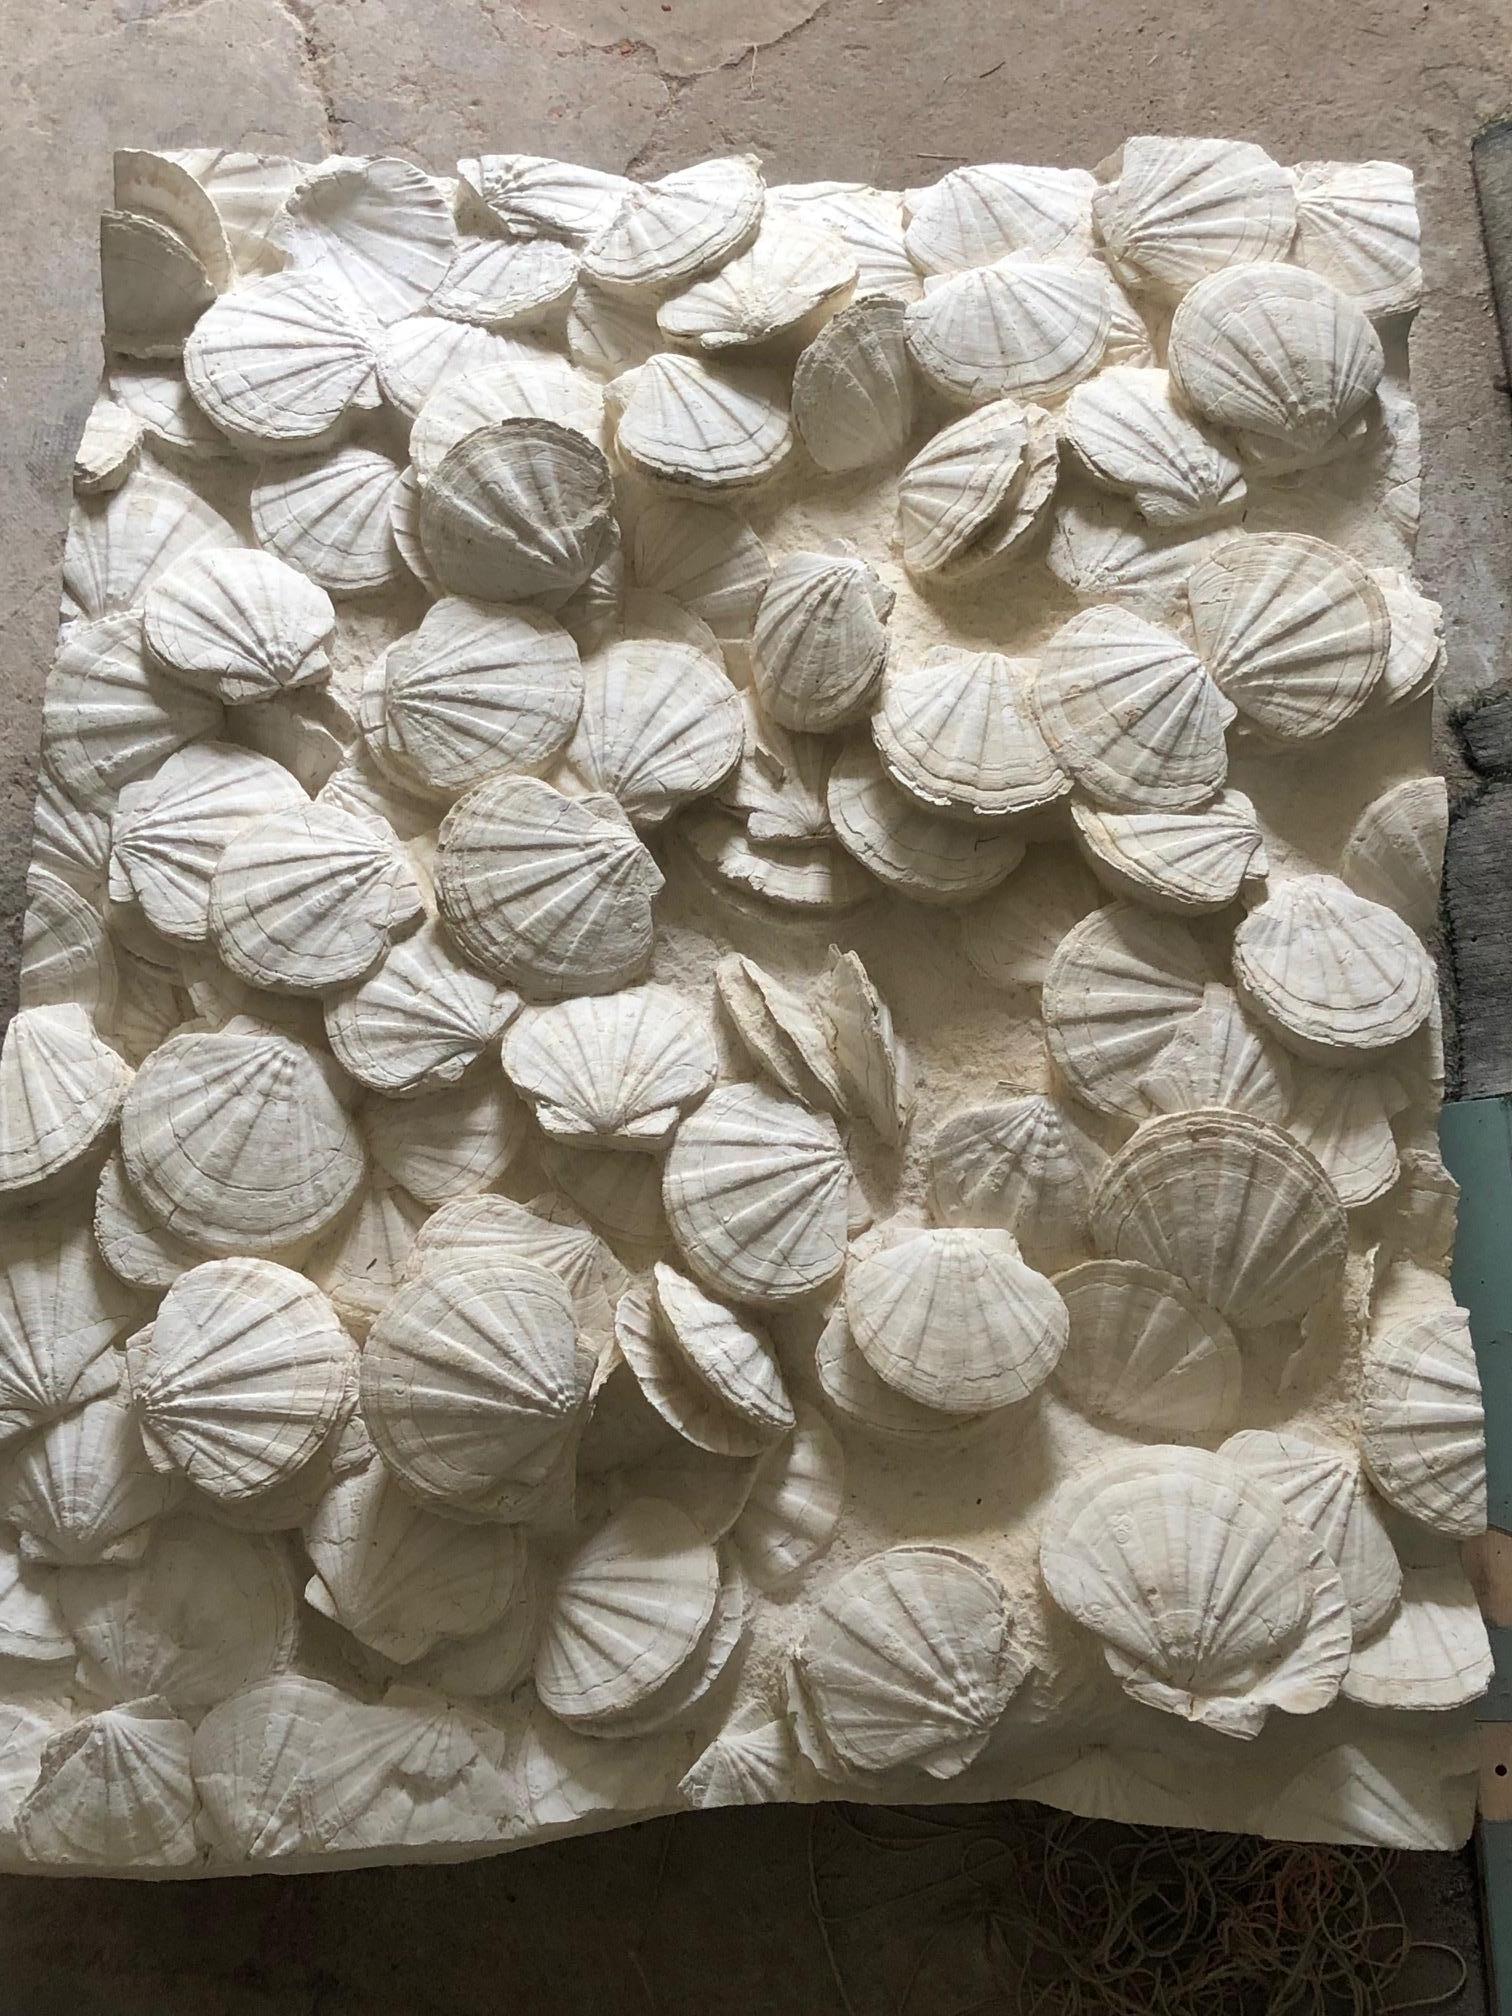 Rare block of well-preserved prehistoric scallops in matrix (limestone).
Gigantopecten restitutensis Fossil
Source: Lacoste, France 
Miocene, c. 20 million years 

Object dimensions: 135 x 110 x 20 cm 
Weight:  approximate 350 kg 

The door to door